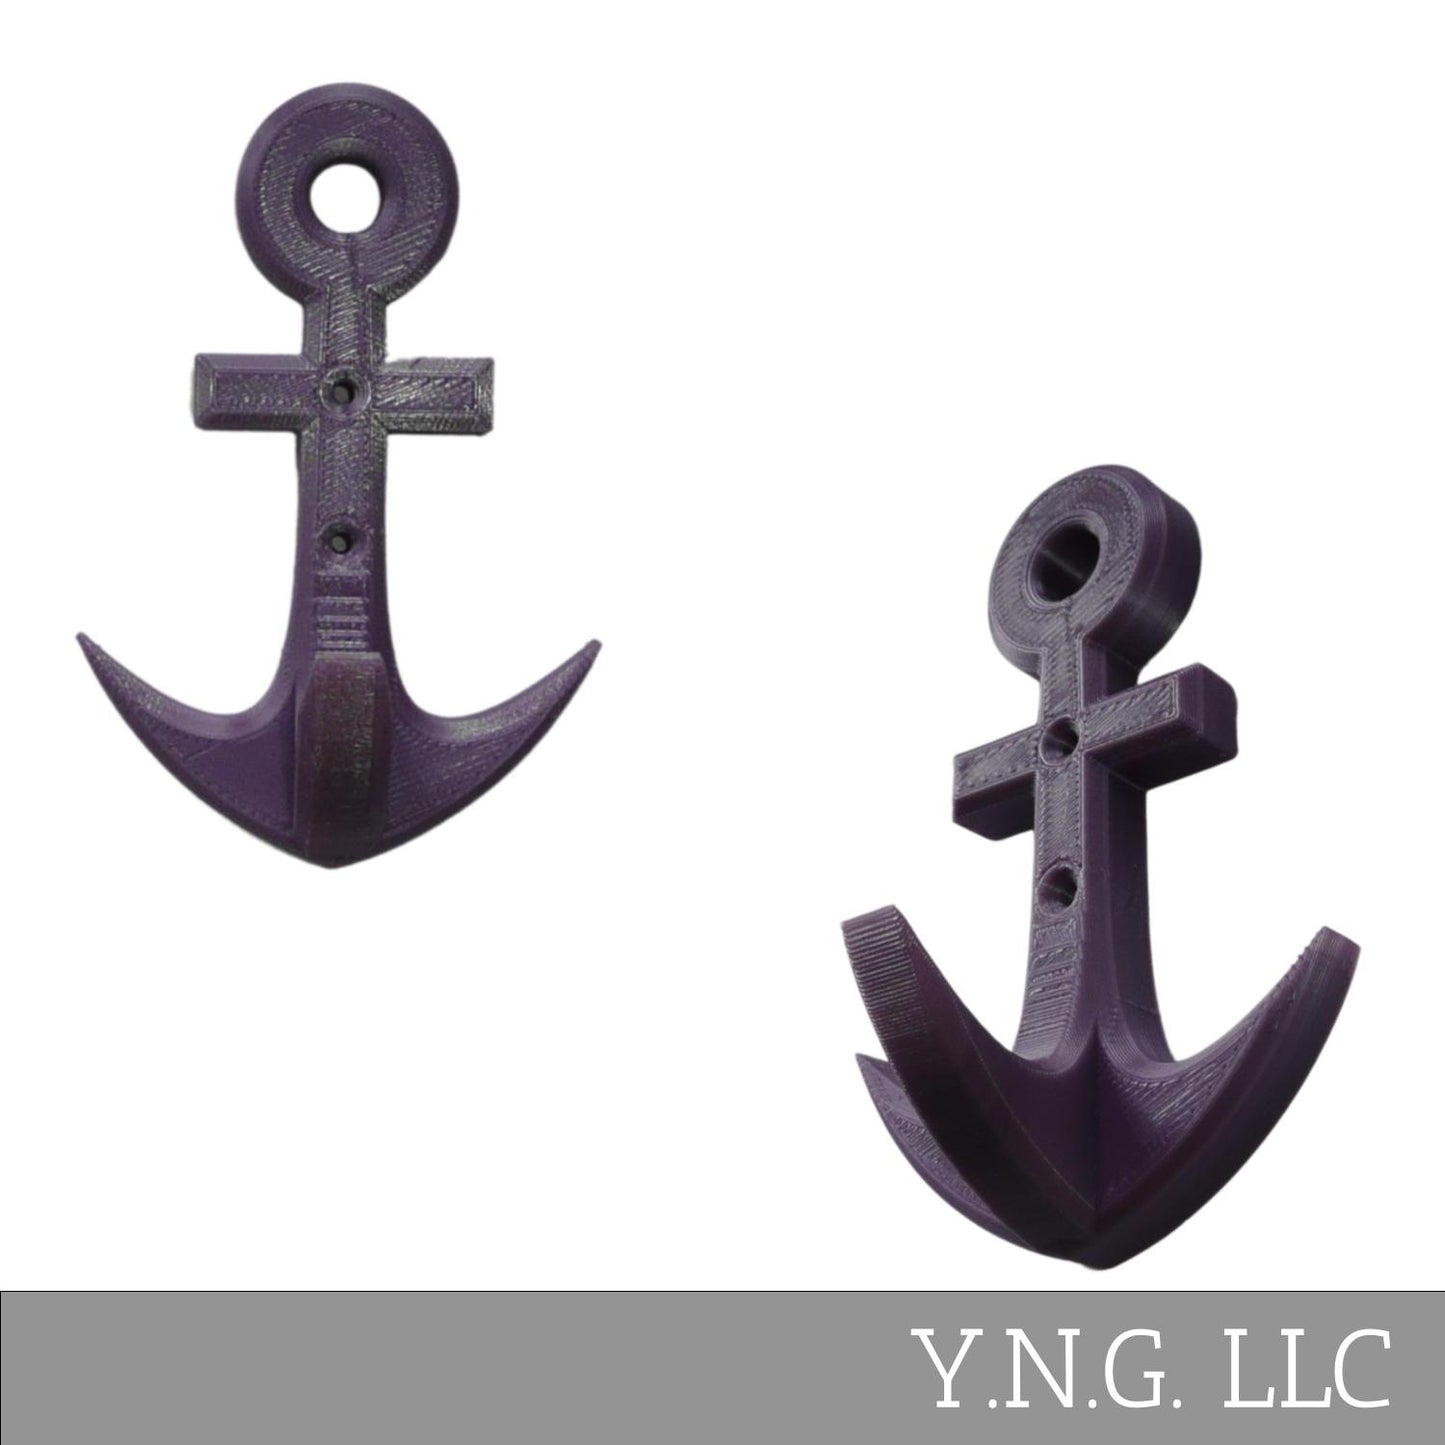 Large Size Boat Anchor Wall Hanger Hook Nautical Themed Decor Made in USA PR139